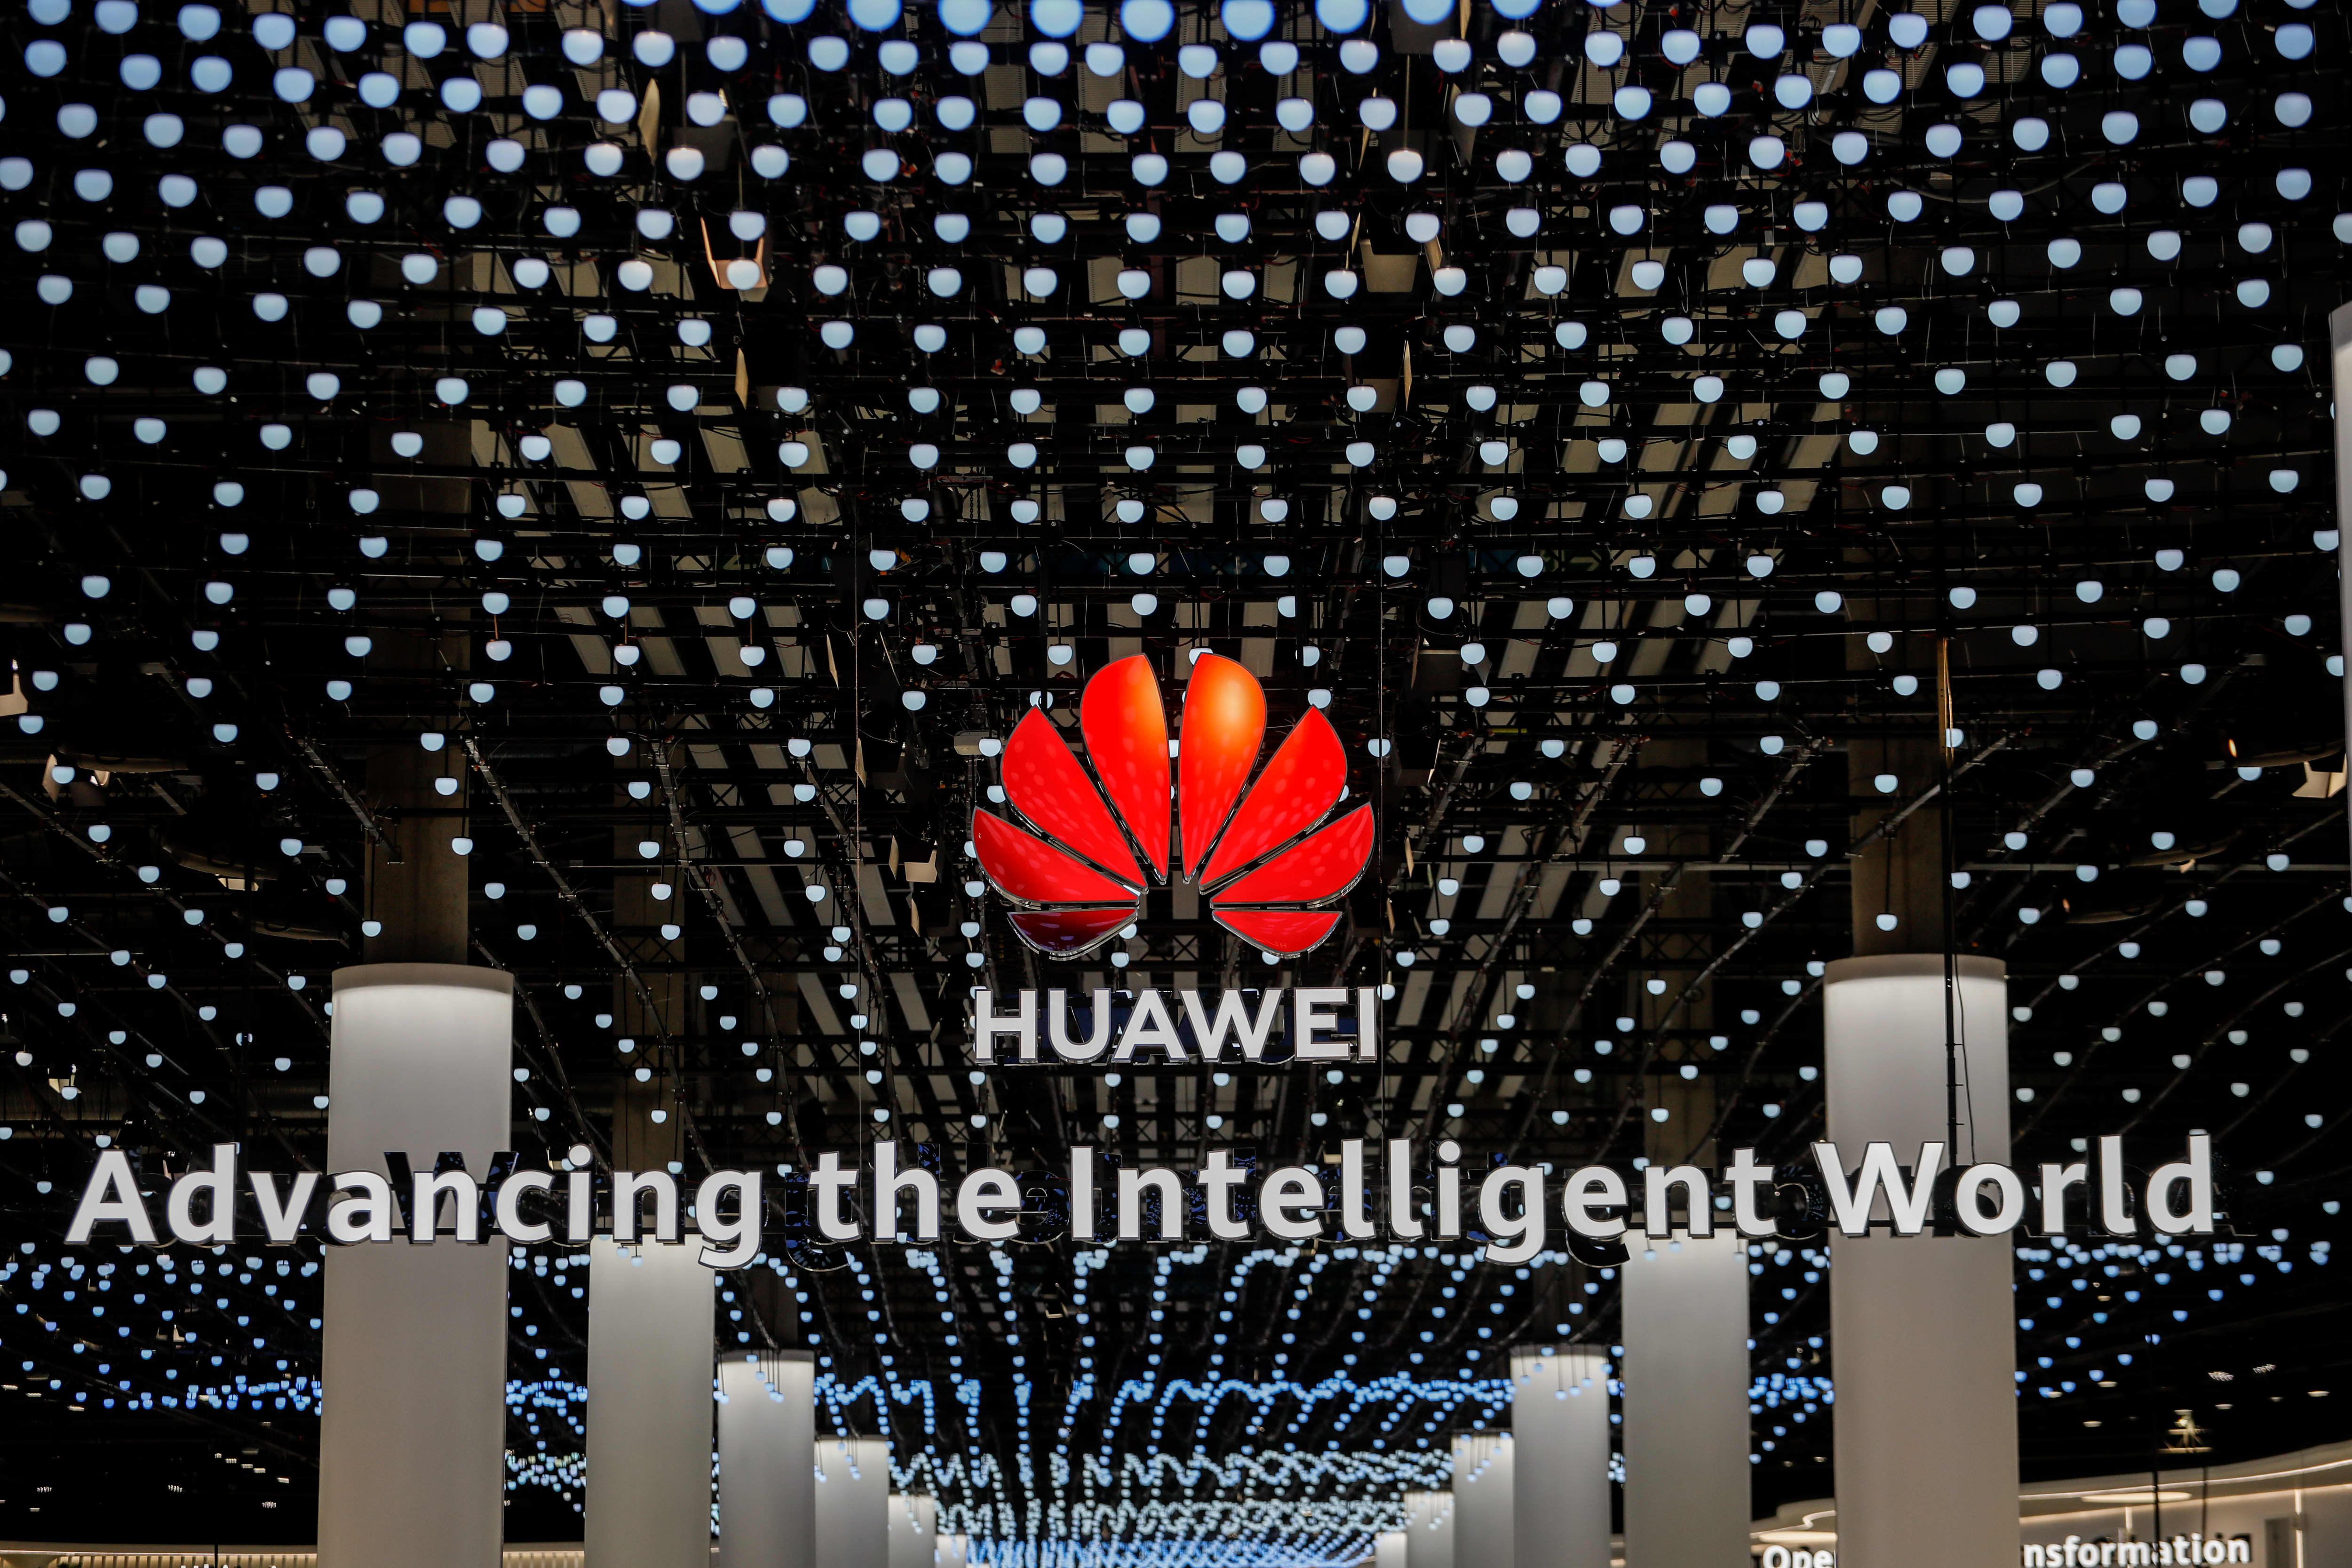 Huawei’s Remarkable Smartphone Resurgence: Overcoming Challenges and Tapping into Opportunities in the Chinese Market